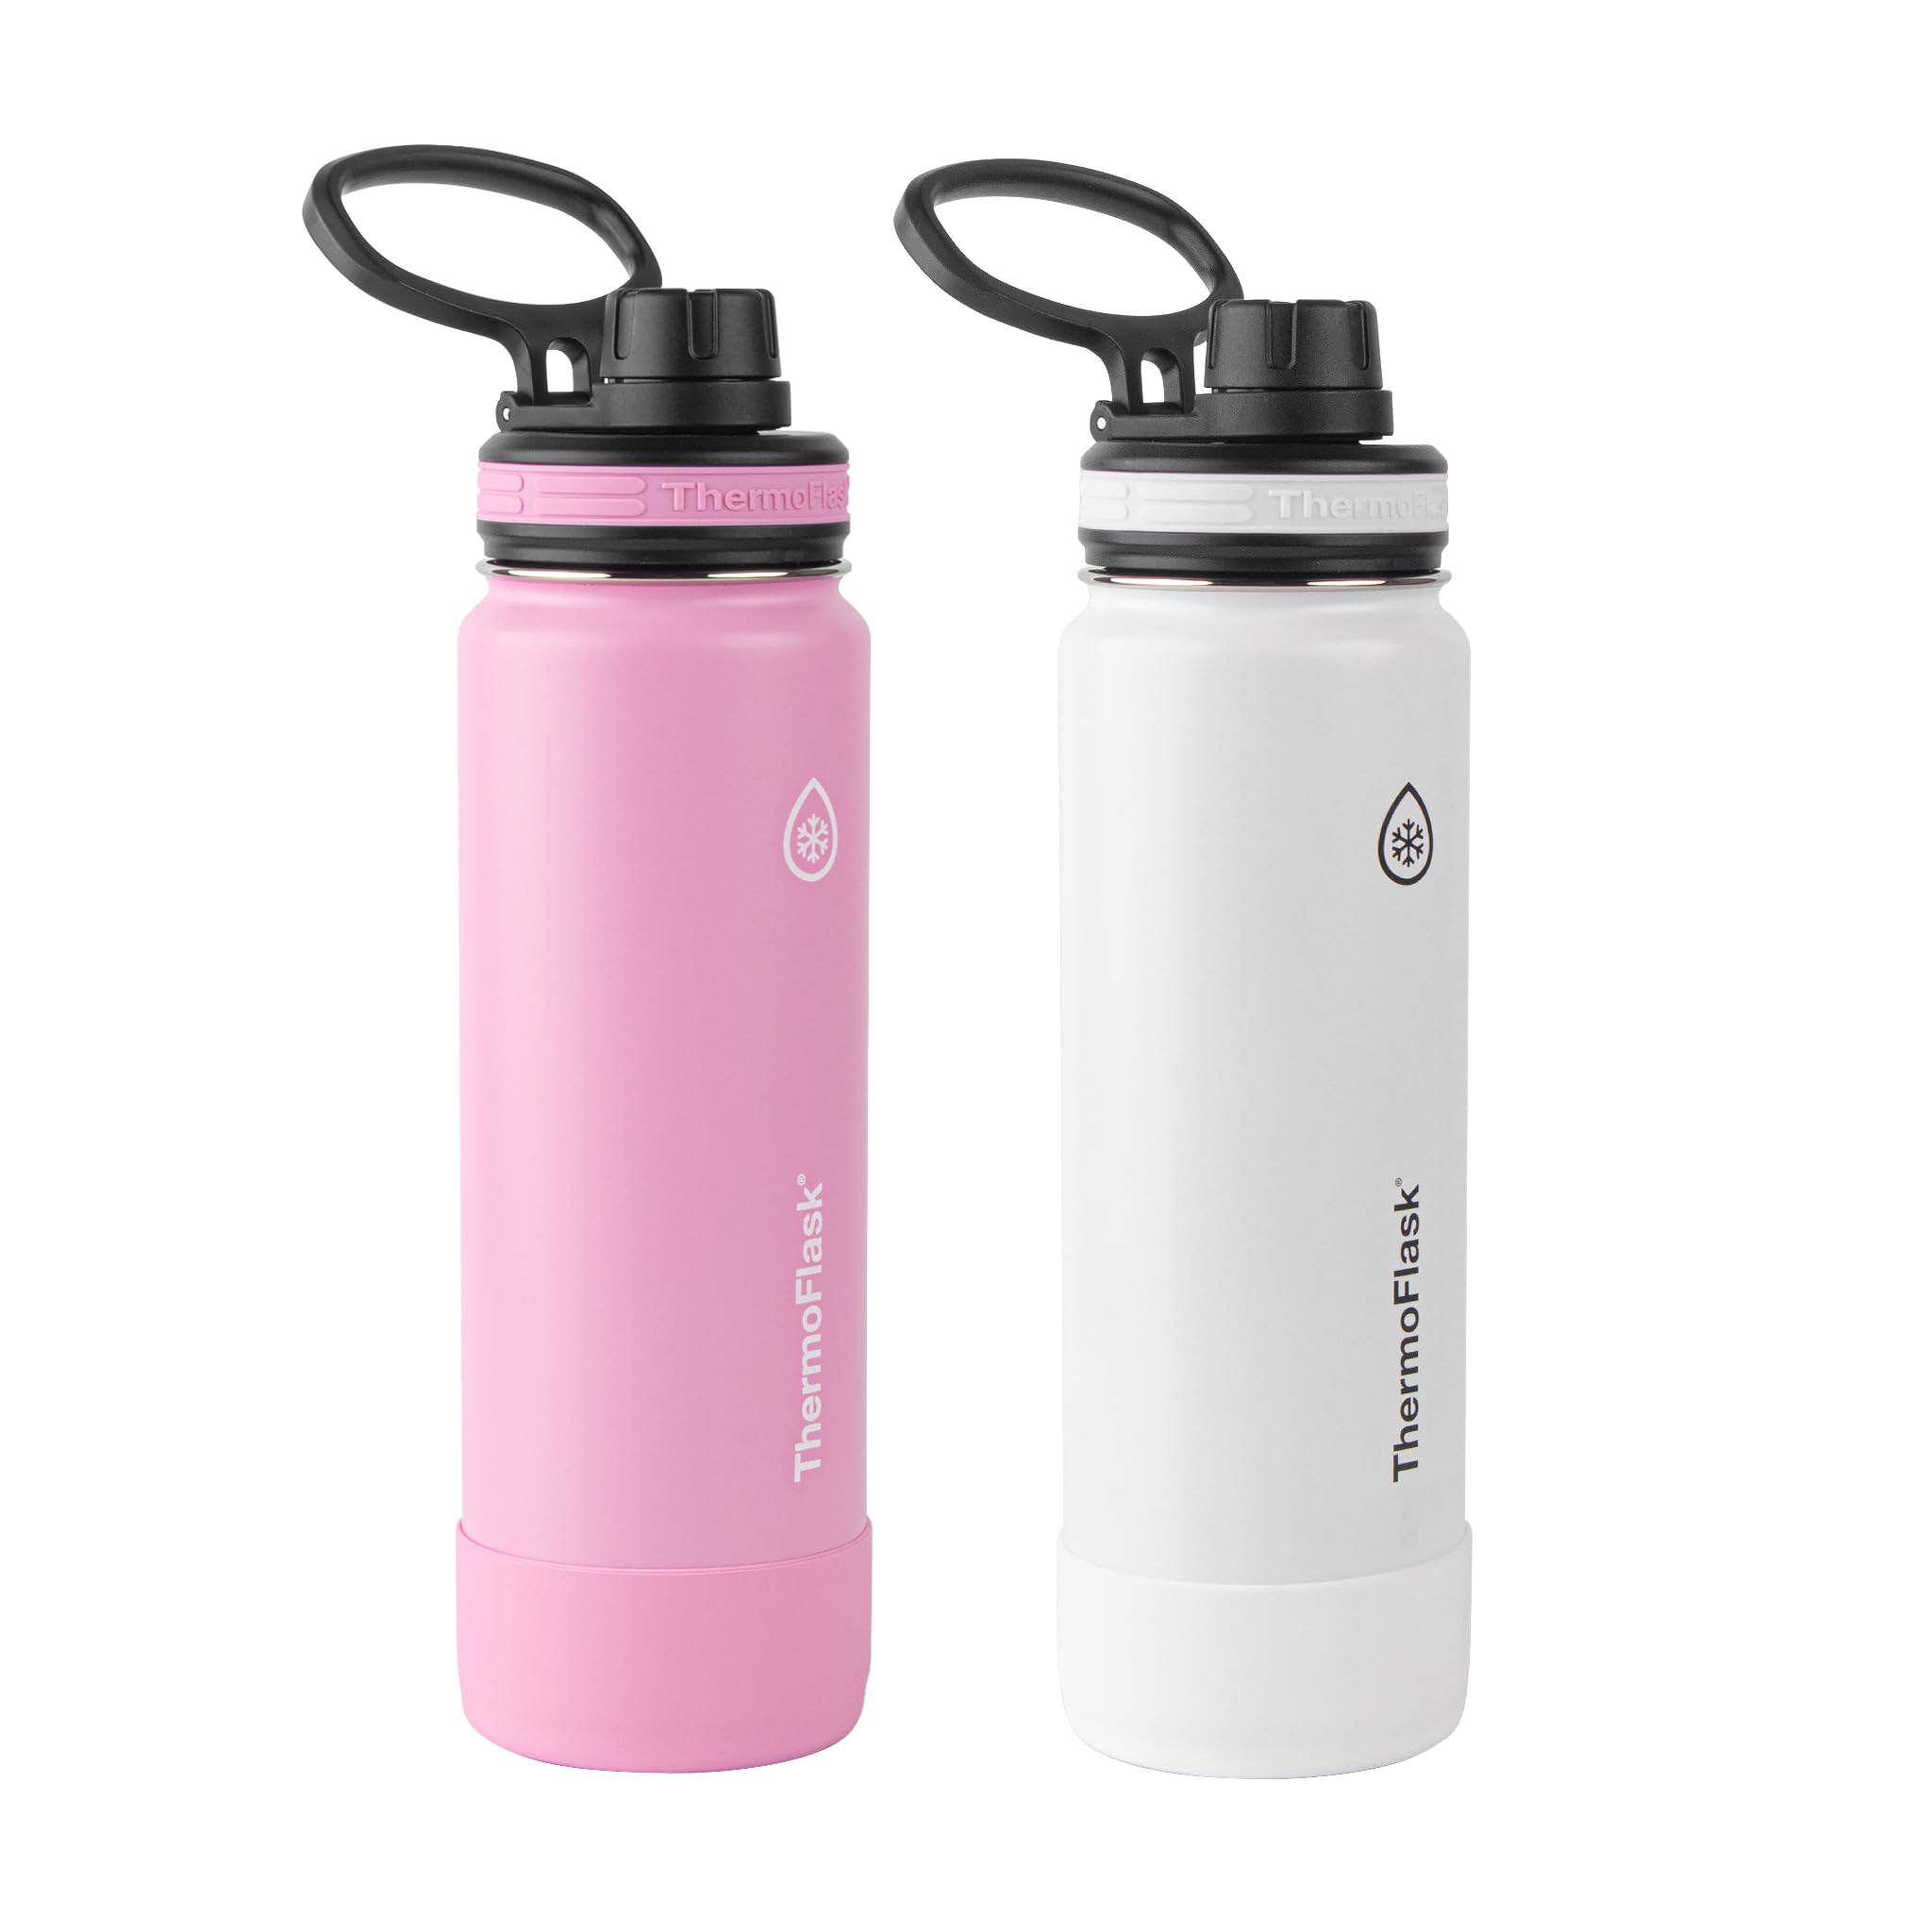 2-Pack 24-Oz ThermoFlask Double Wall Vacuum Insulated Stainless Steel Water Bottles (Strawberry & Arctic White) $23 + Free Shipping w/ Prime or on $35+